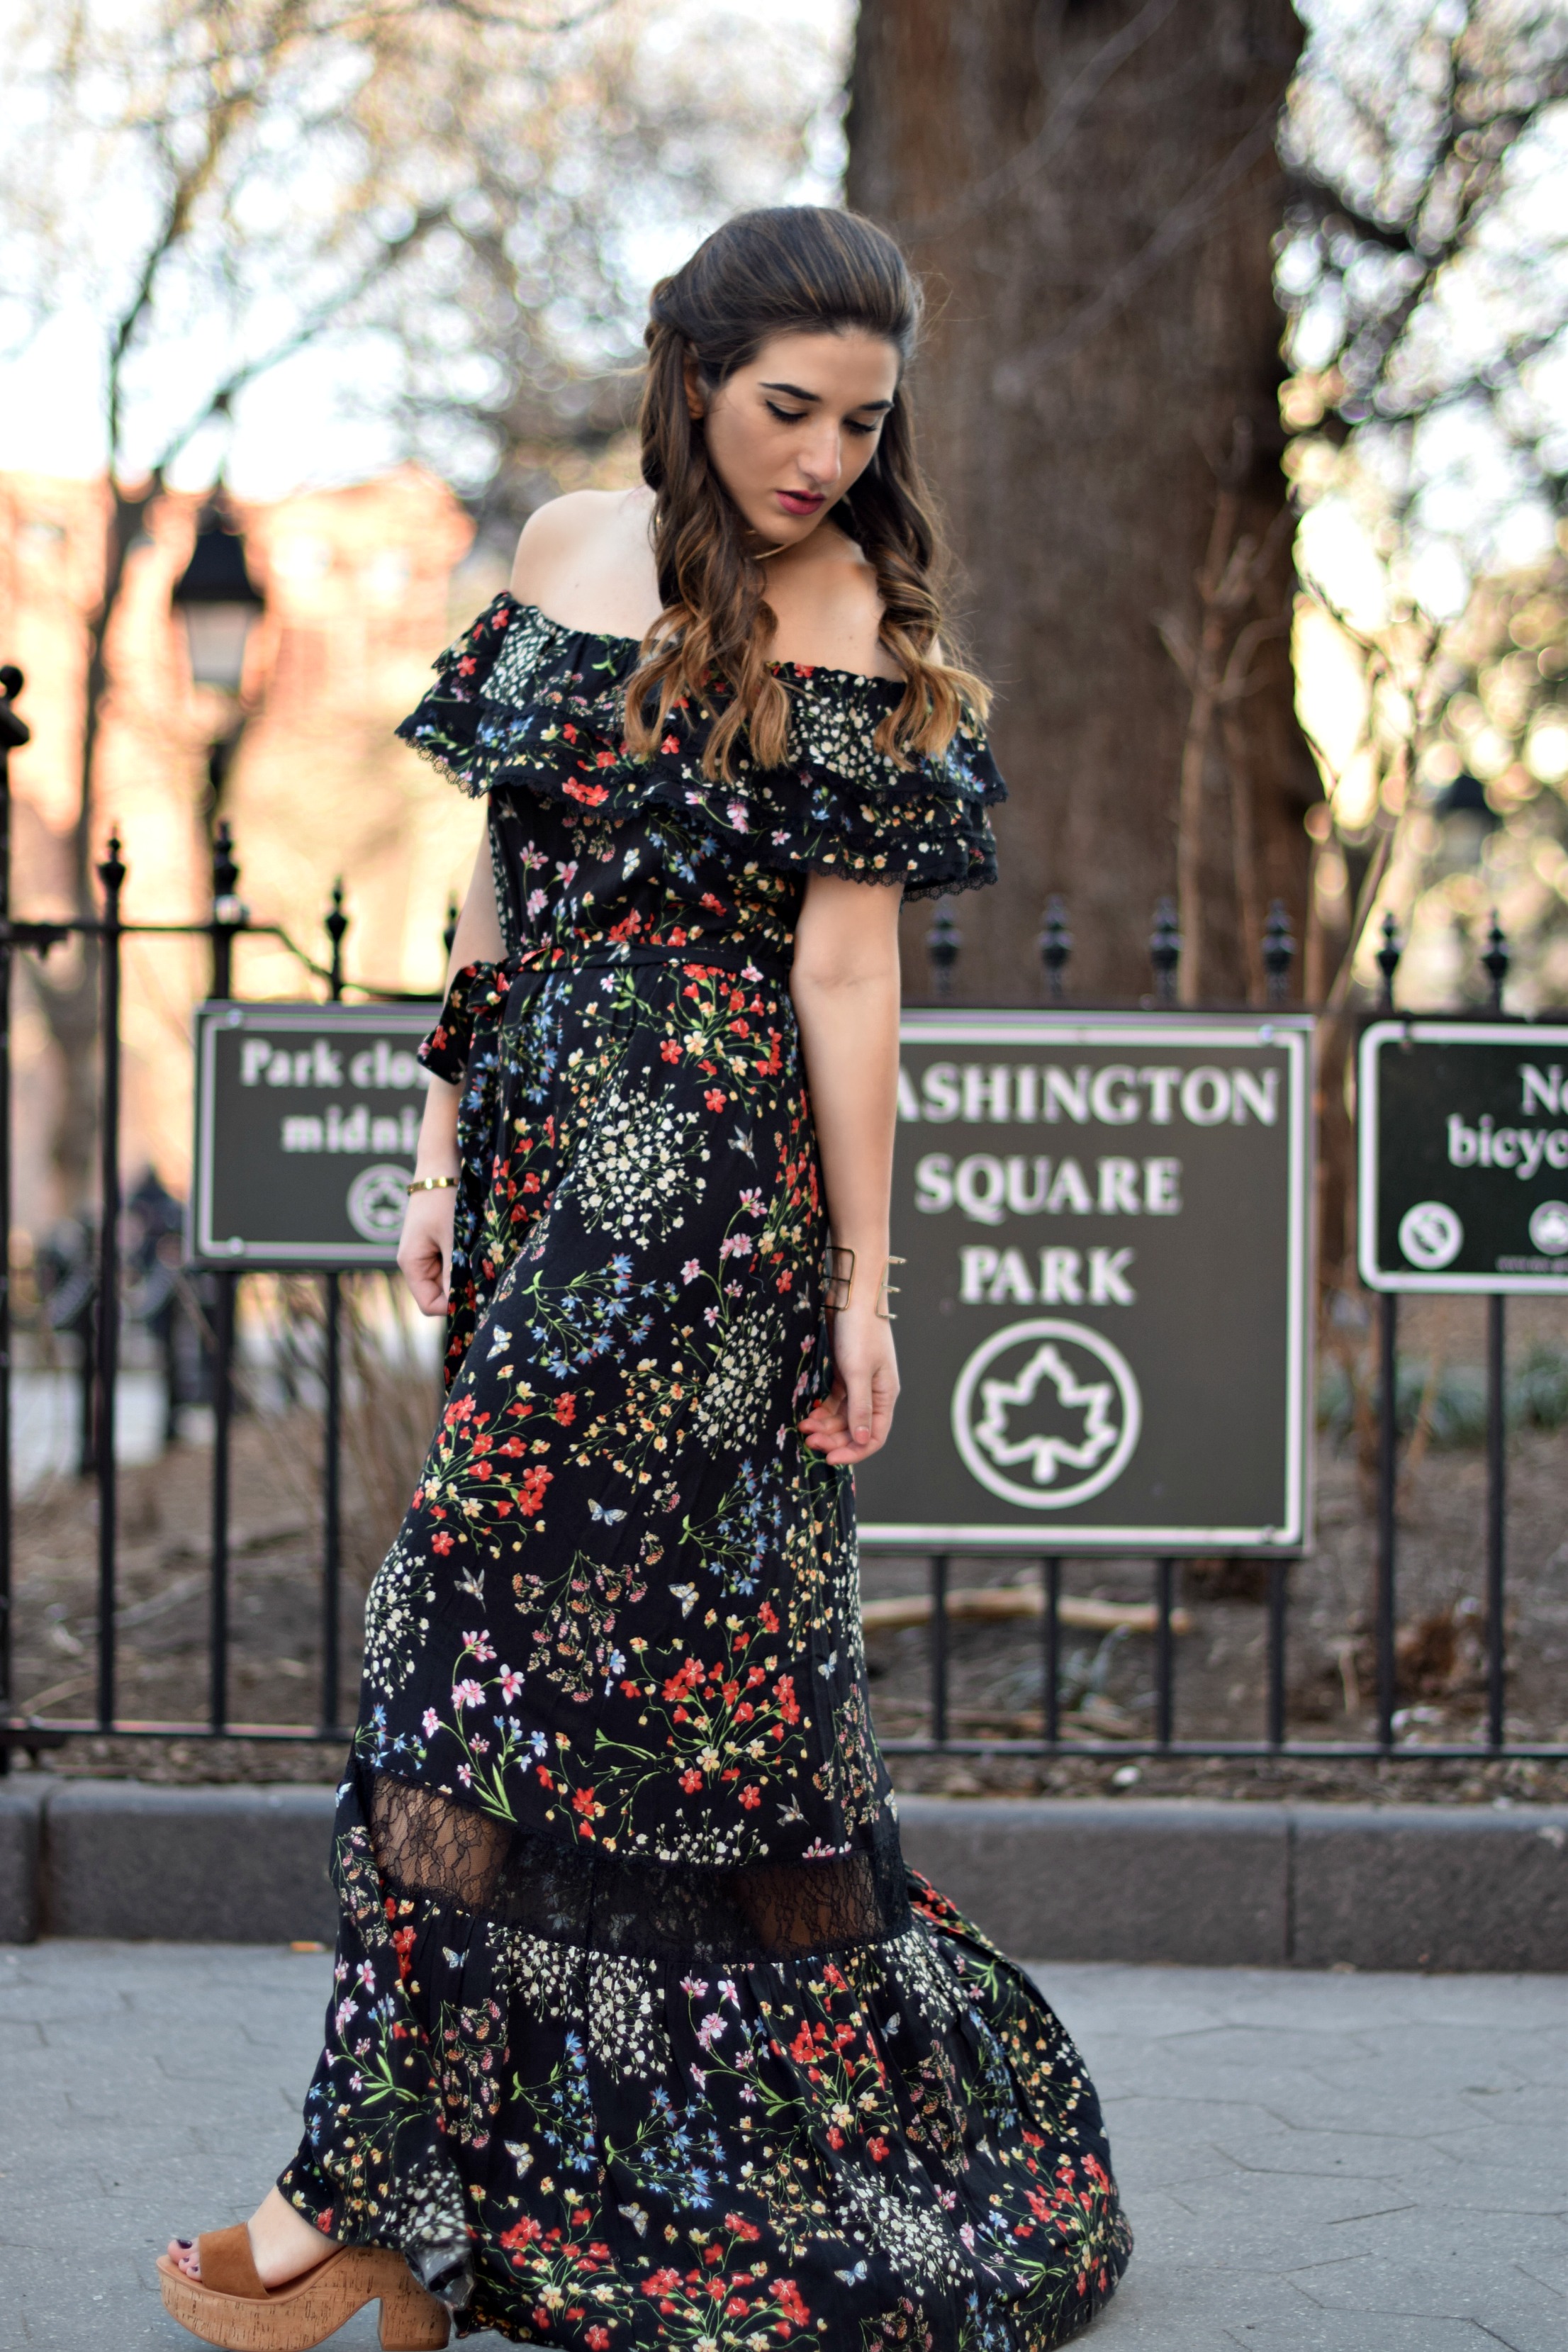 Alice Olivia Floral Dress Louboutins & Love Fashion Blog Esther Santer NYC Street Style Blogger Outfit OOTD Trunk Club Lydell Hair Brunette Model New York City Photoshoot Spring Summer Choker Gold Jewelry Bracelet Beautiful Pretty Shoulder Inspo Shoes.jpg